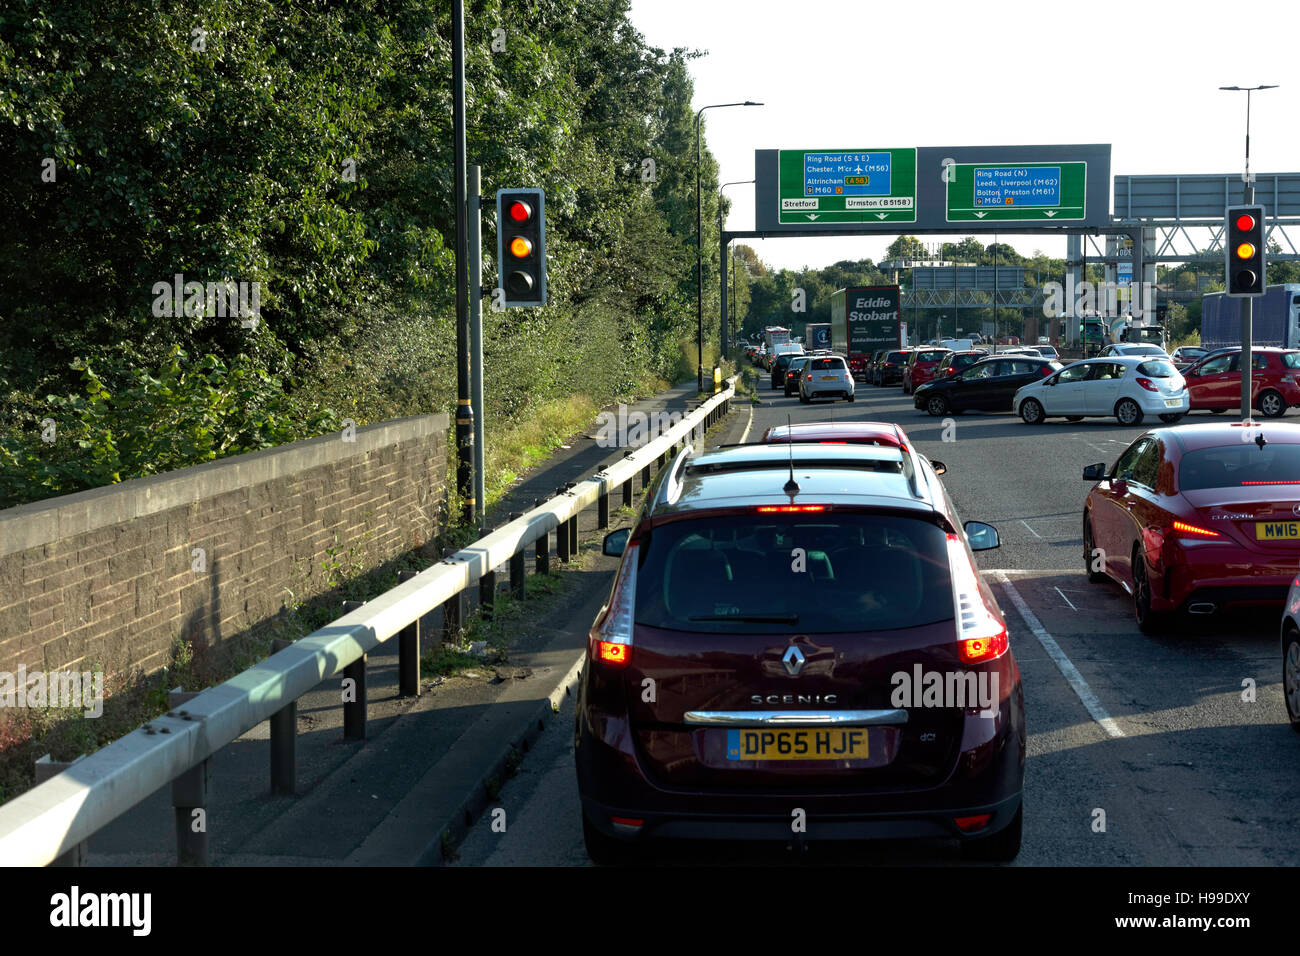 Traffic stopped at red,amber,traffic light amid congestion at rush hour,Manchester,England Stock Photo